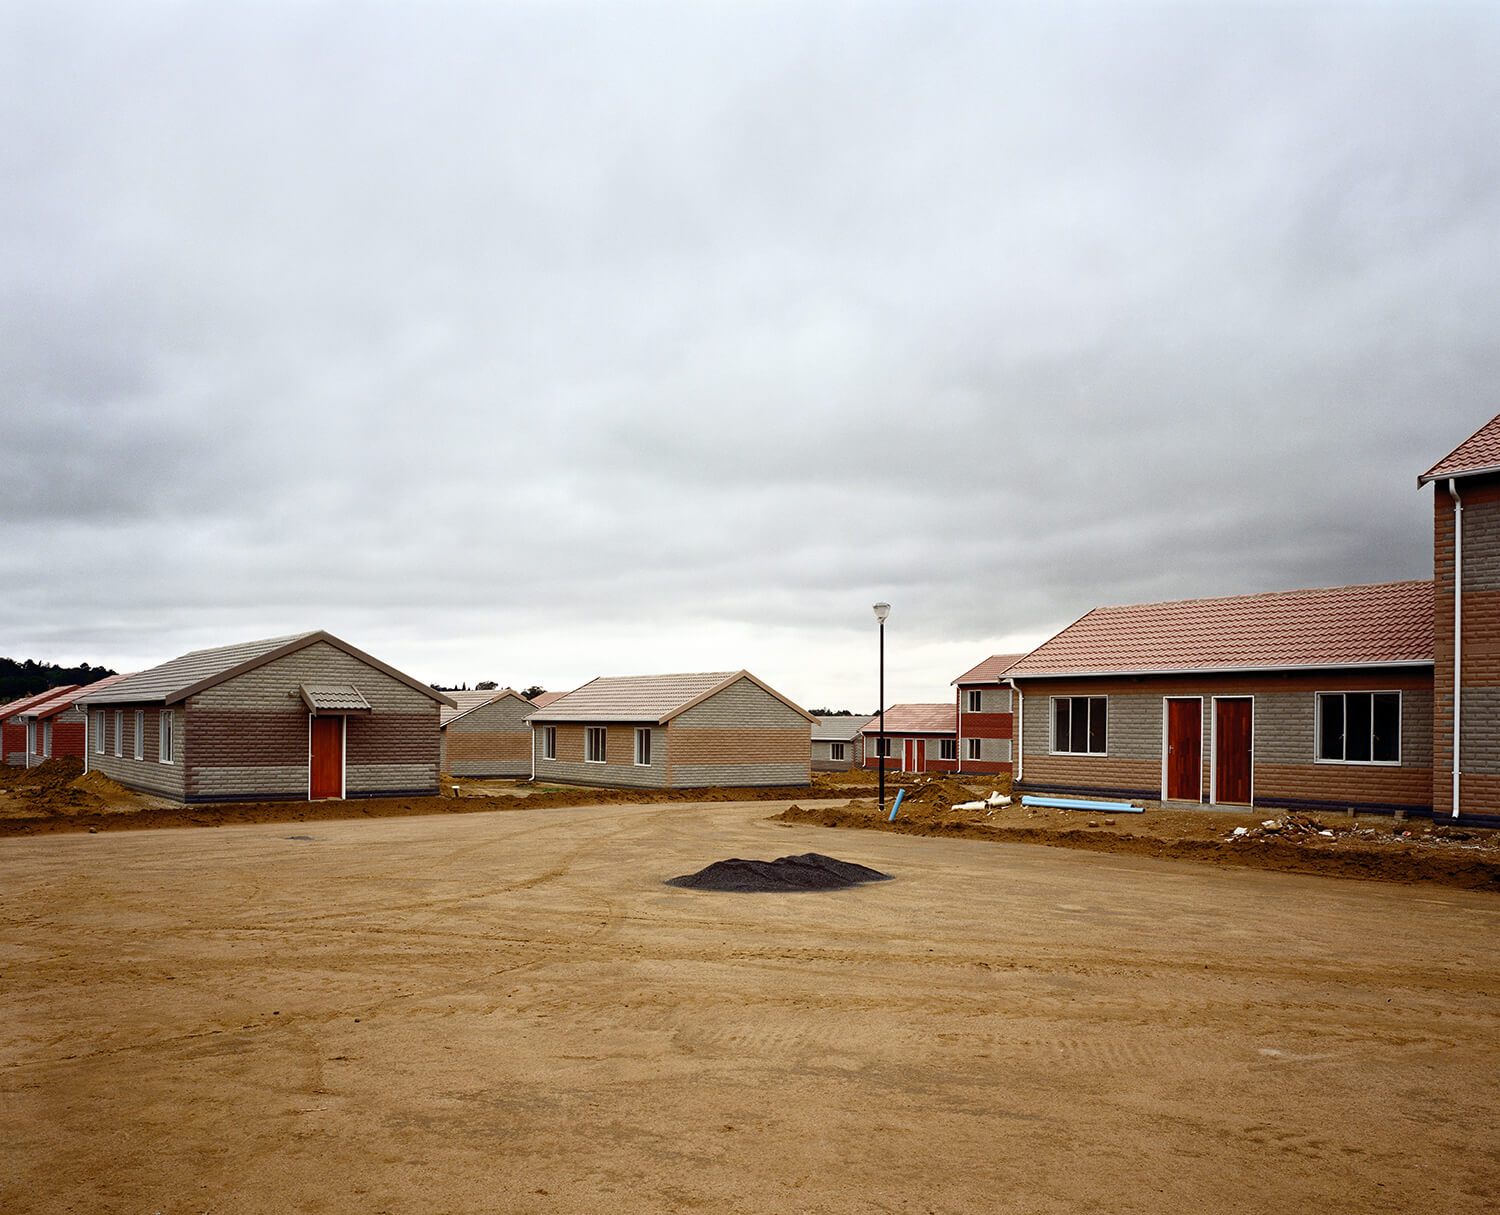  Low Cost Housing, S.Africa (c-type print, 30x40-, 2004) 